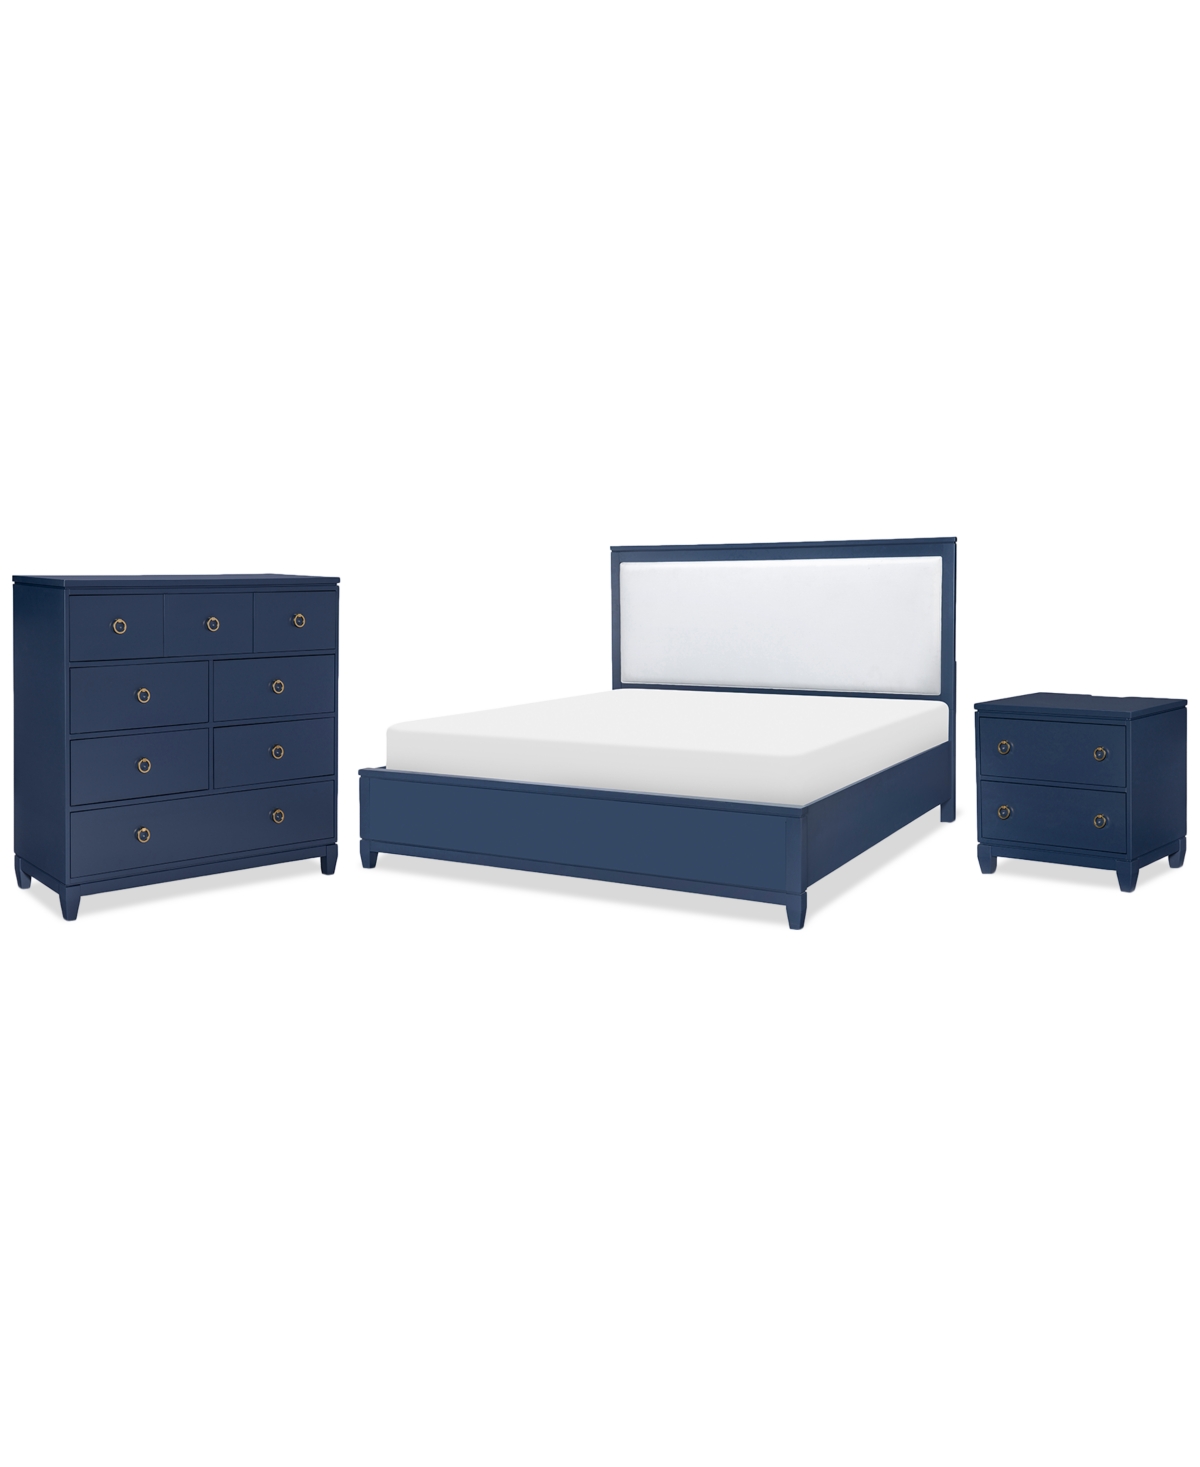 Furniture Summerland 3pc Set (king Upholstered Bed, Chest, Nightstand) In Blue